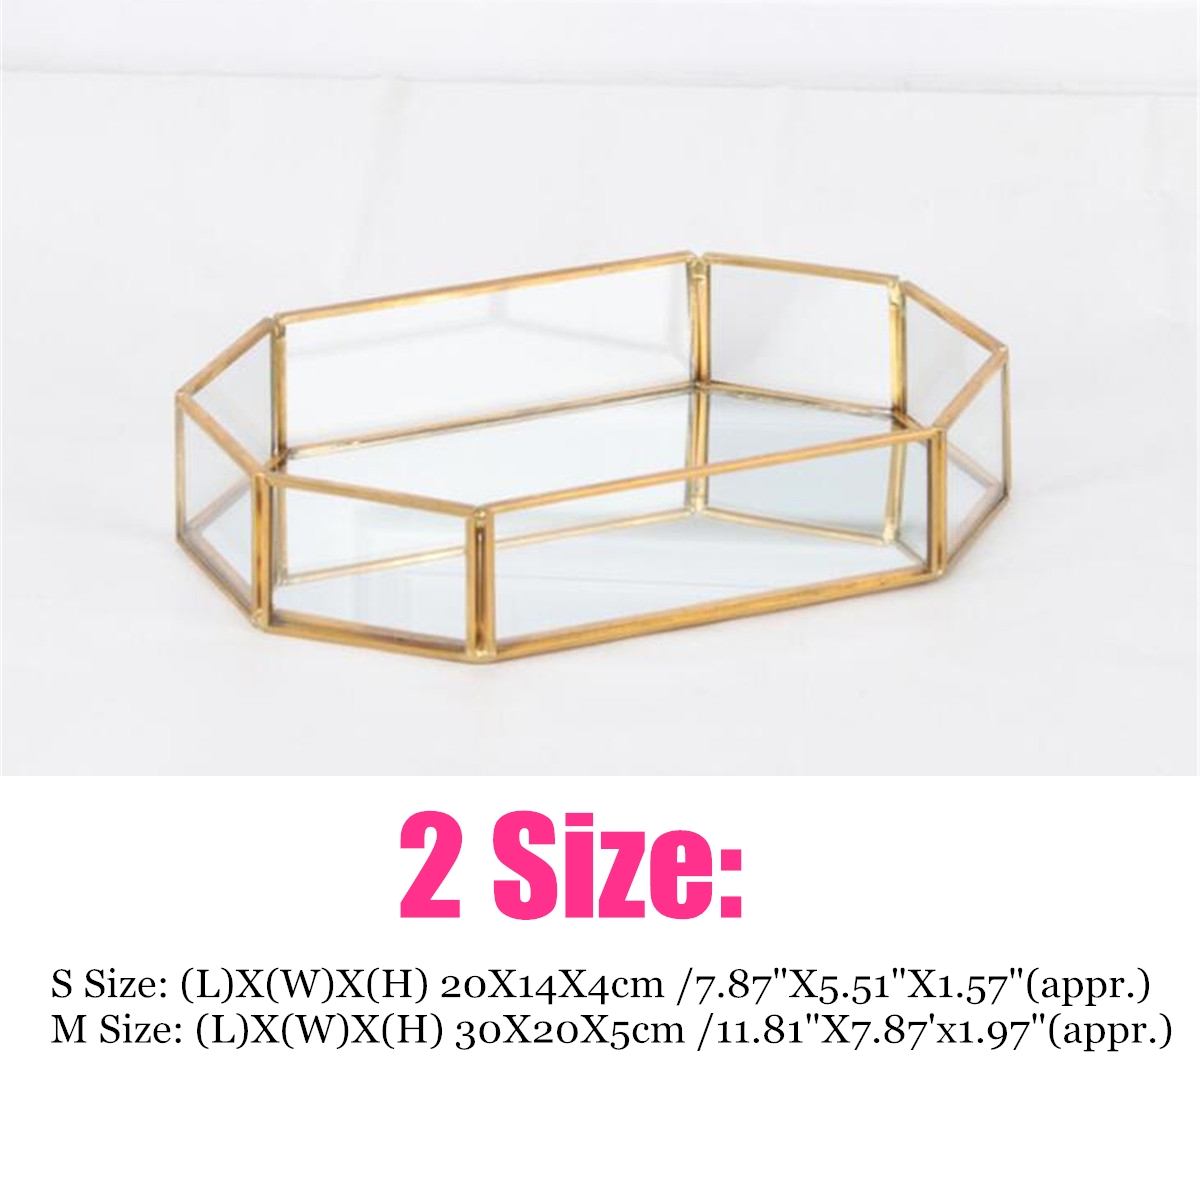 2-Size-Mirror-Glass-Tray-Octagon-Cosmetic-Makeup-Desktop-Organizer-Jewelry-Display-Stand-Holder-1382768-7